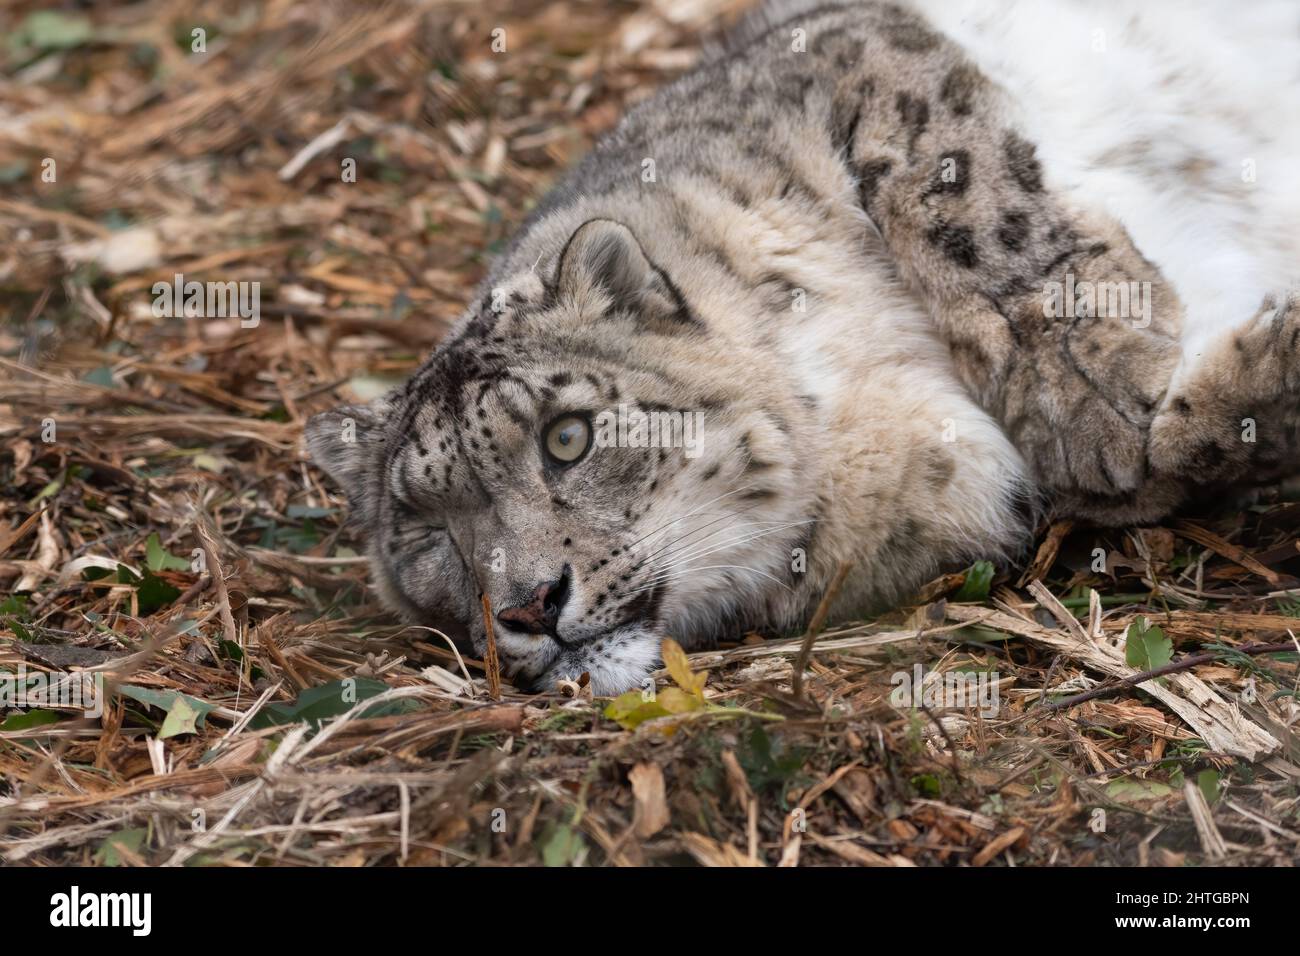 Snow leopard rolling on the ground. Playful big cat. Stock Photo